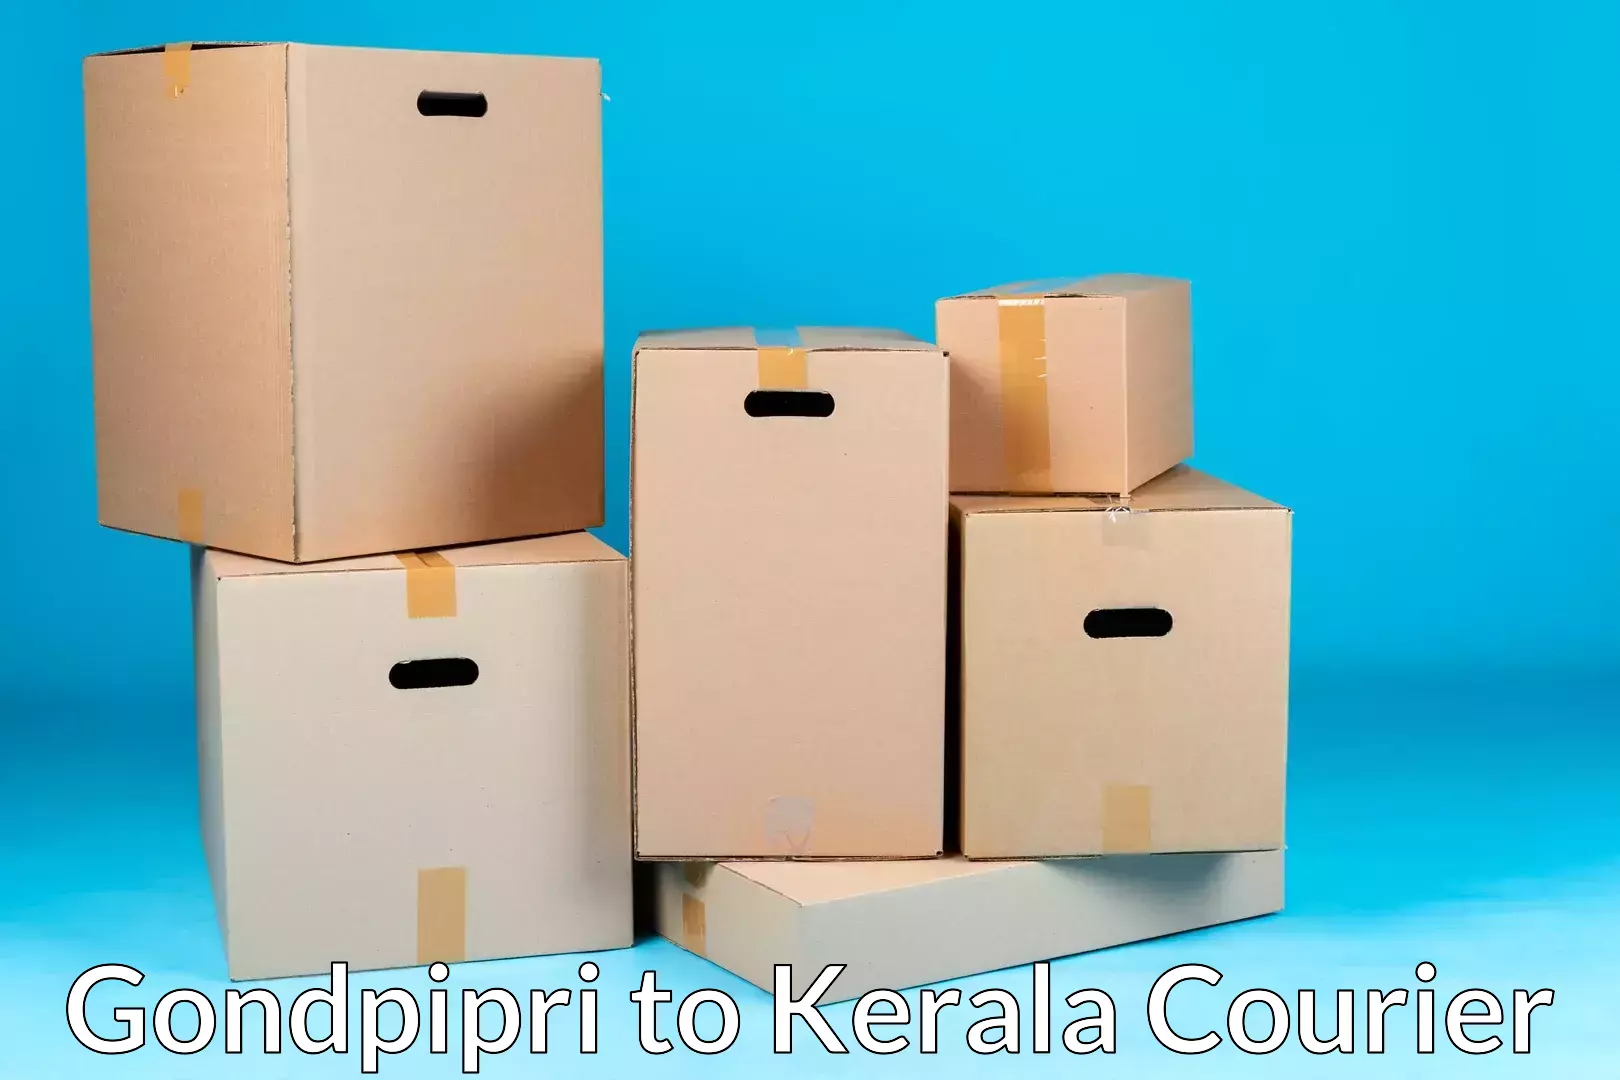 Efficient packing services Gondpipri to Kerala